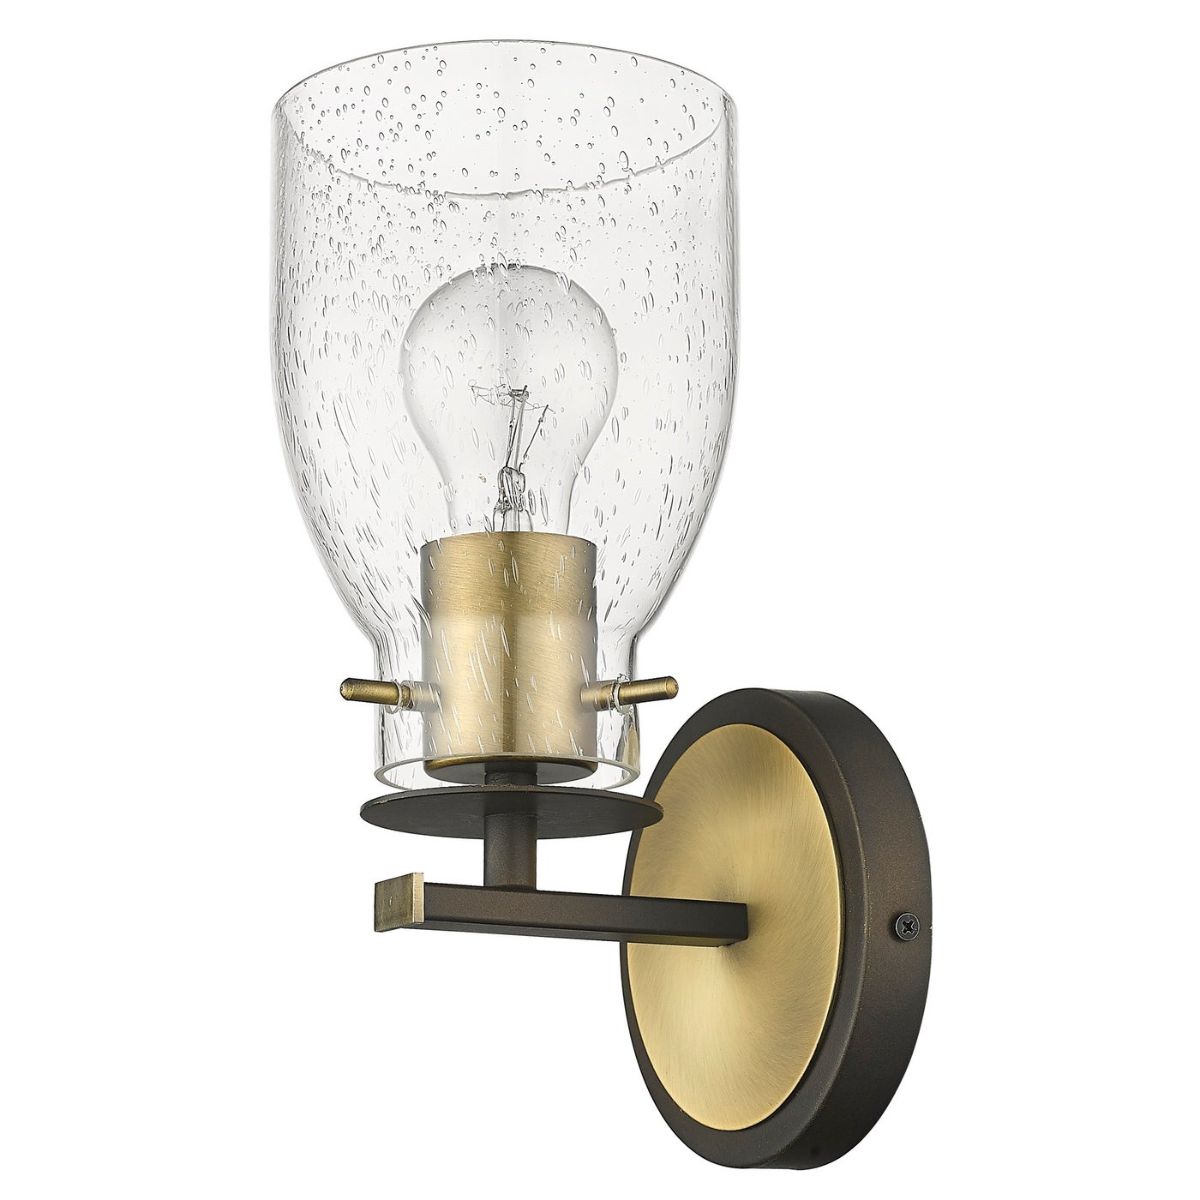 Shelby 11 in. Bath Sconce Oil Rubbed Bronze & Antique Brass Finish